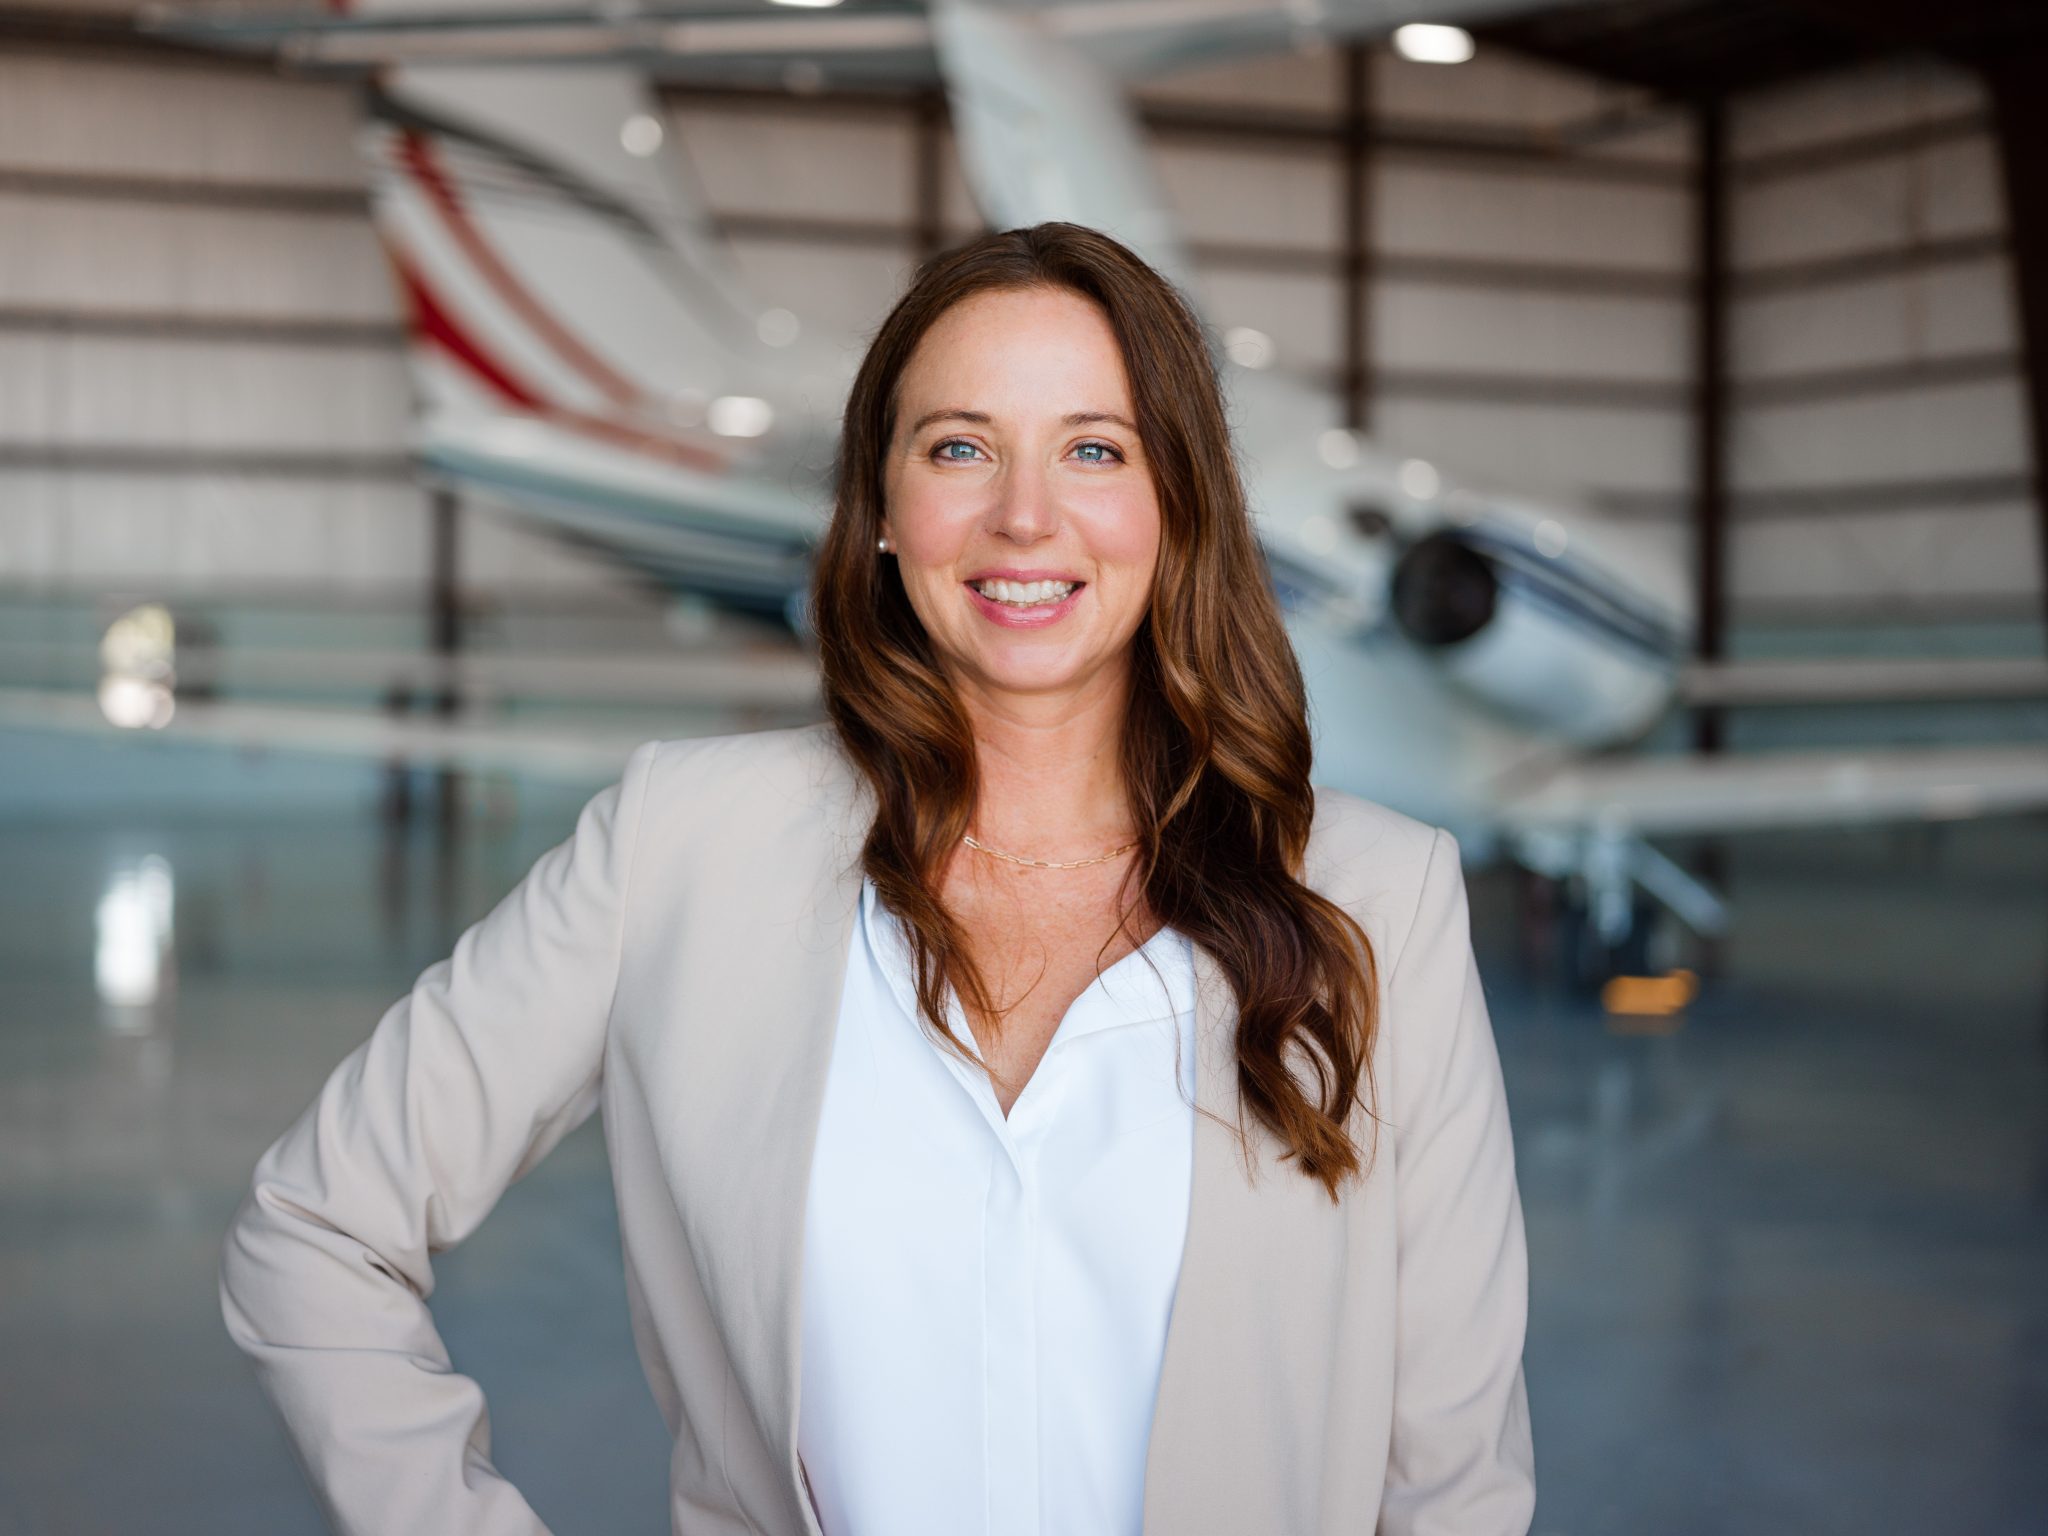 Emily Deaton appointed to the Board of Directors for Angel Flight West